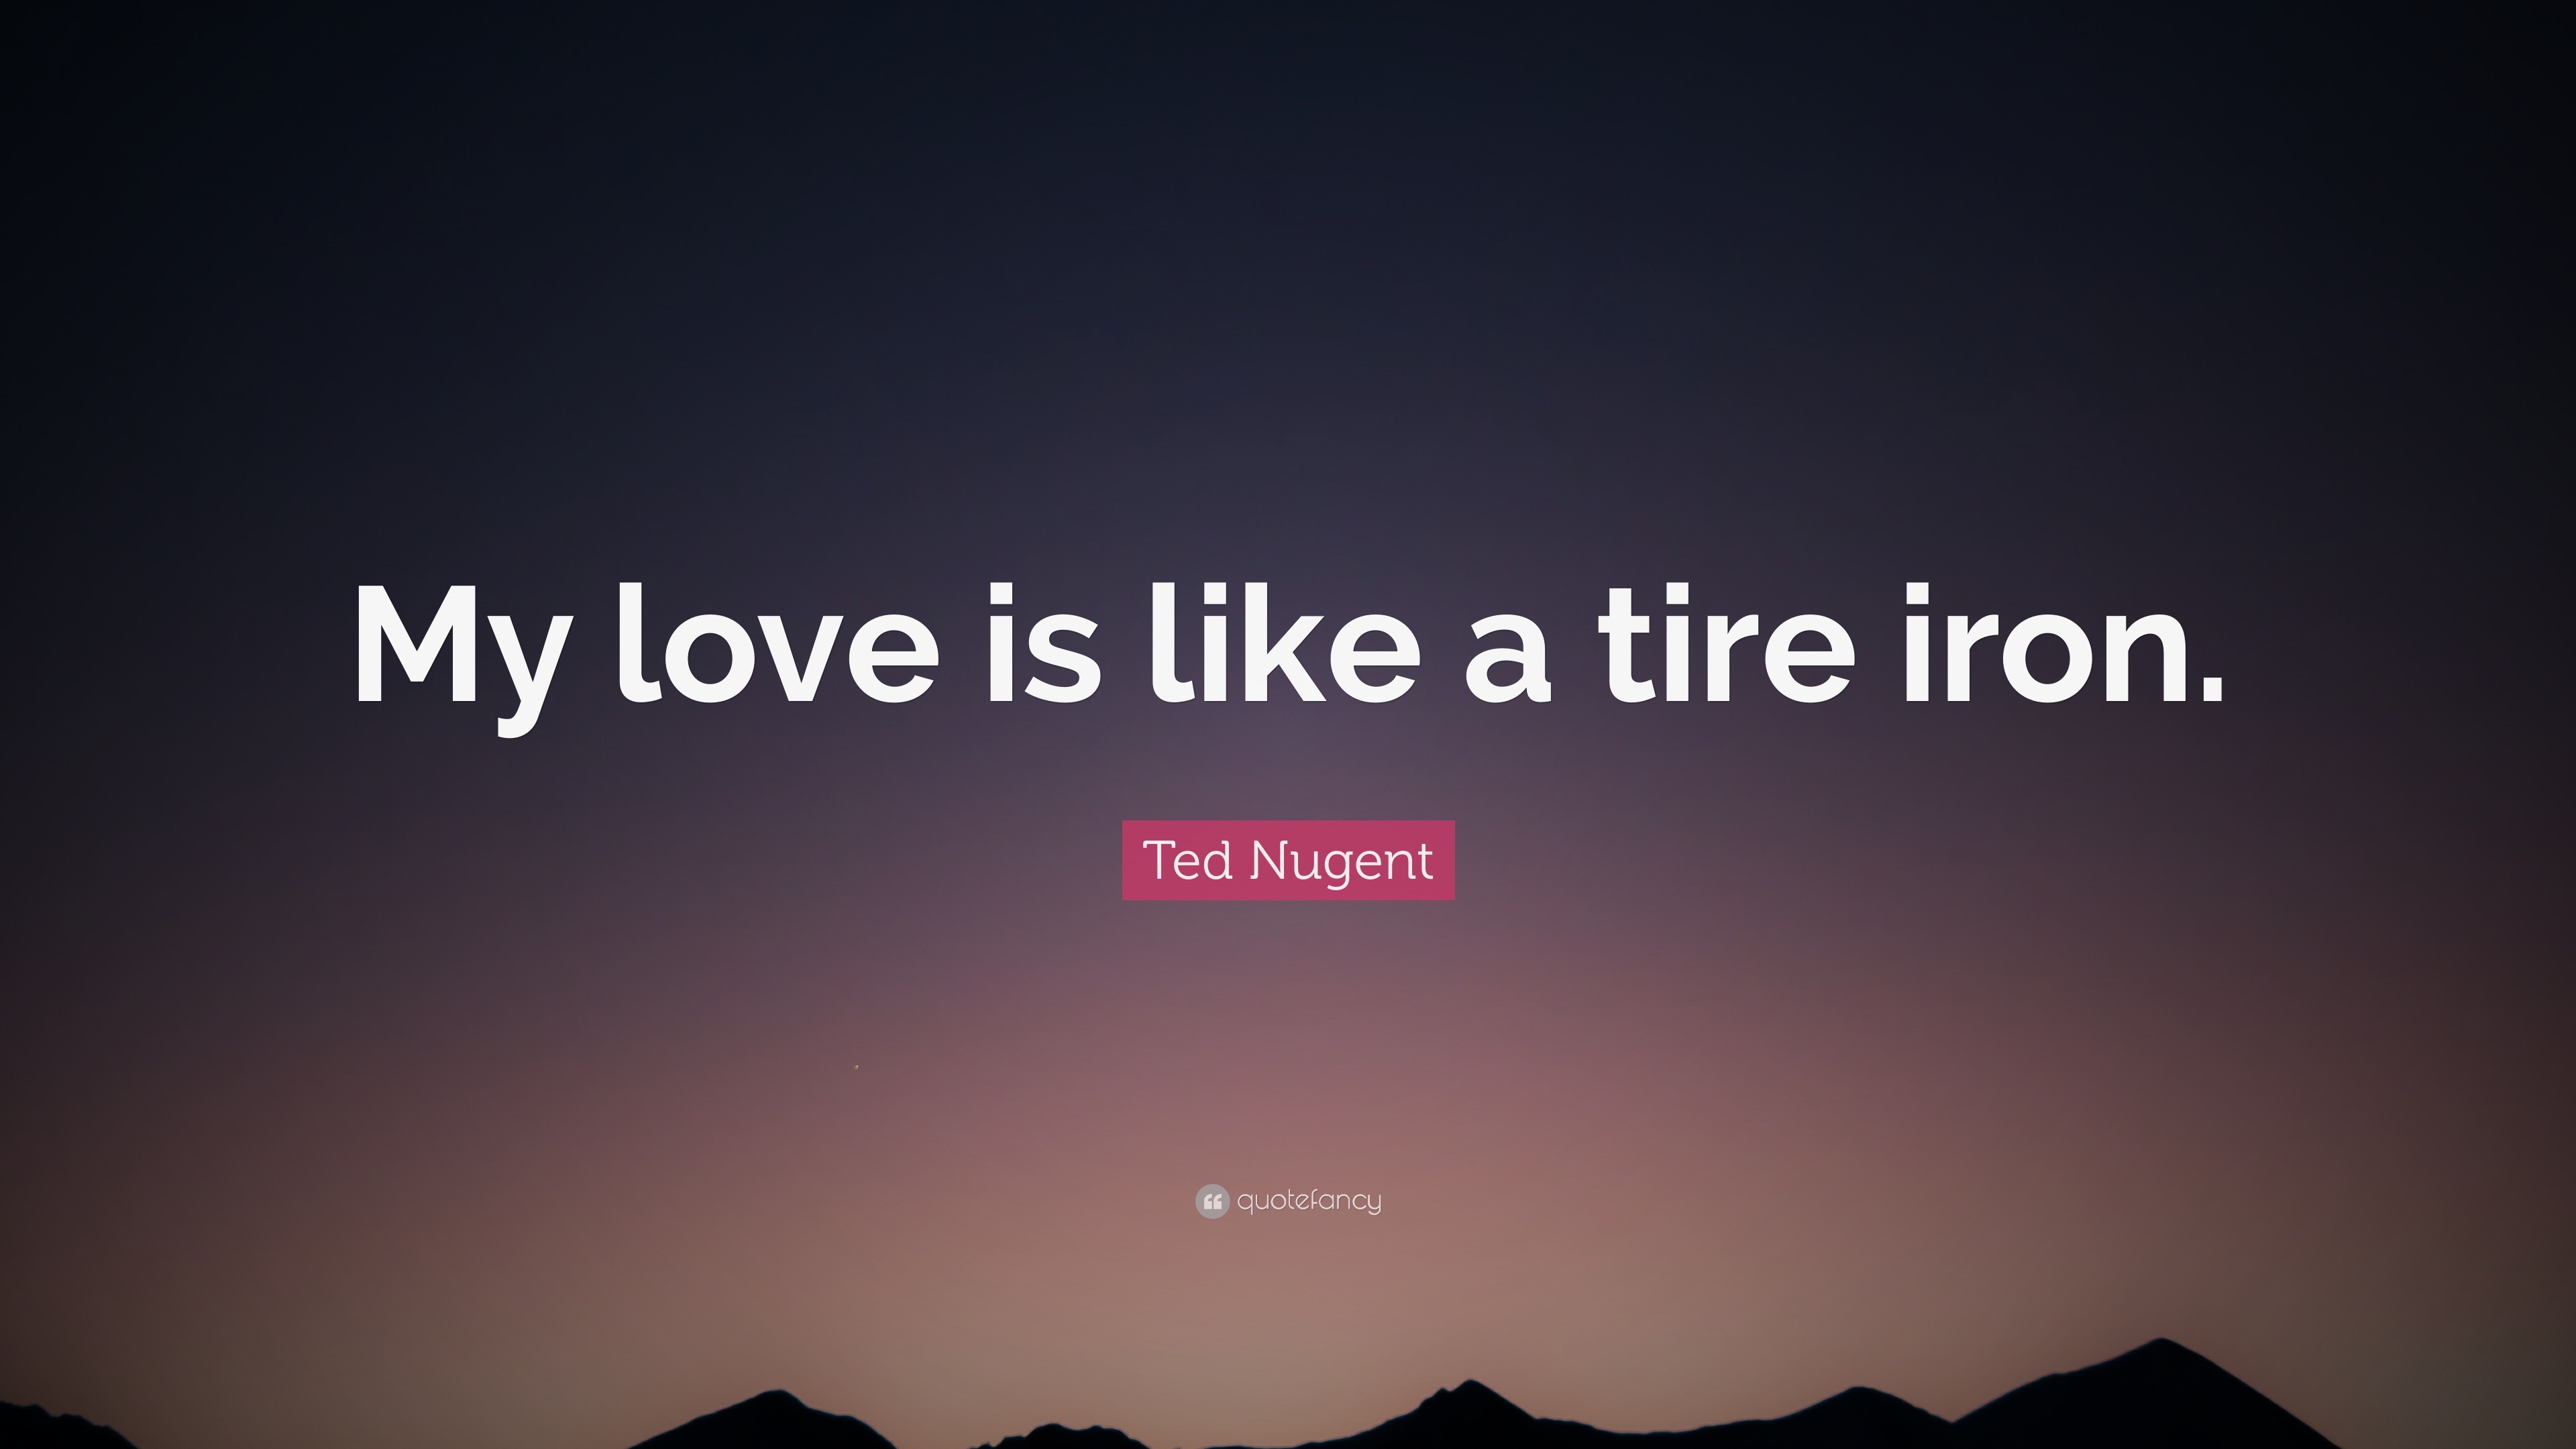 Ted Nugent Quote “My love is like a tire iron ”